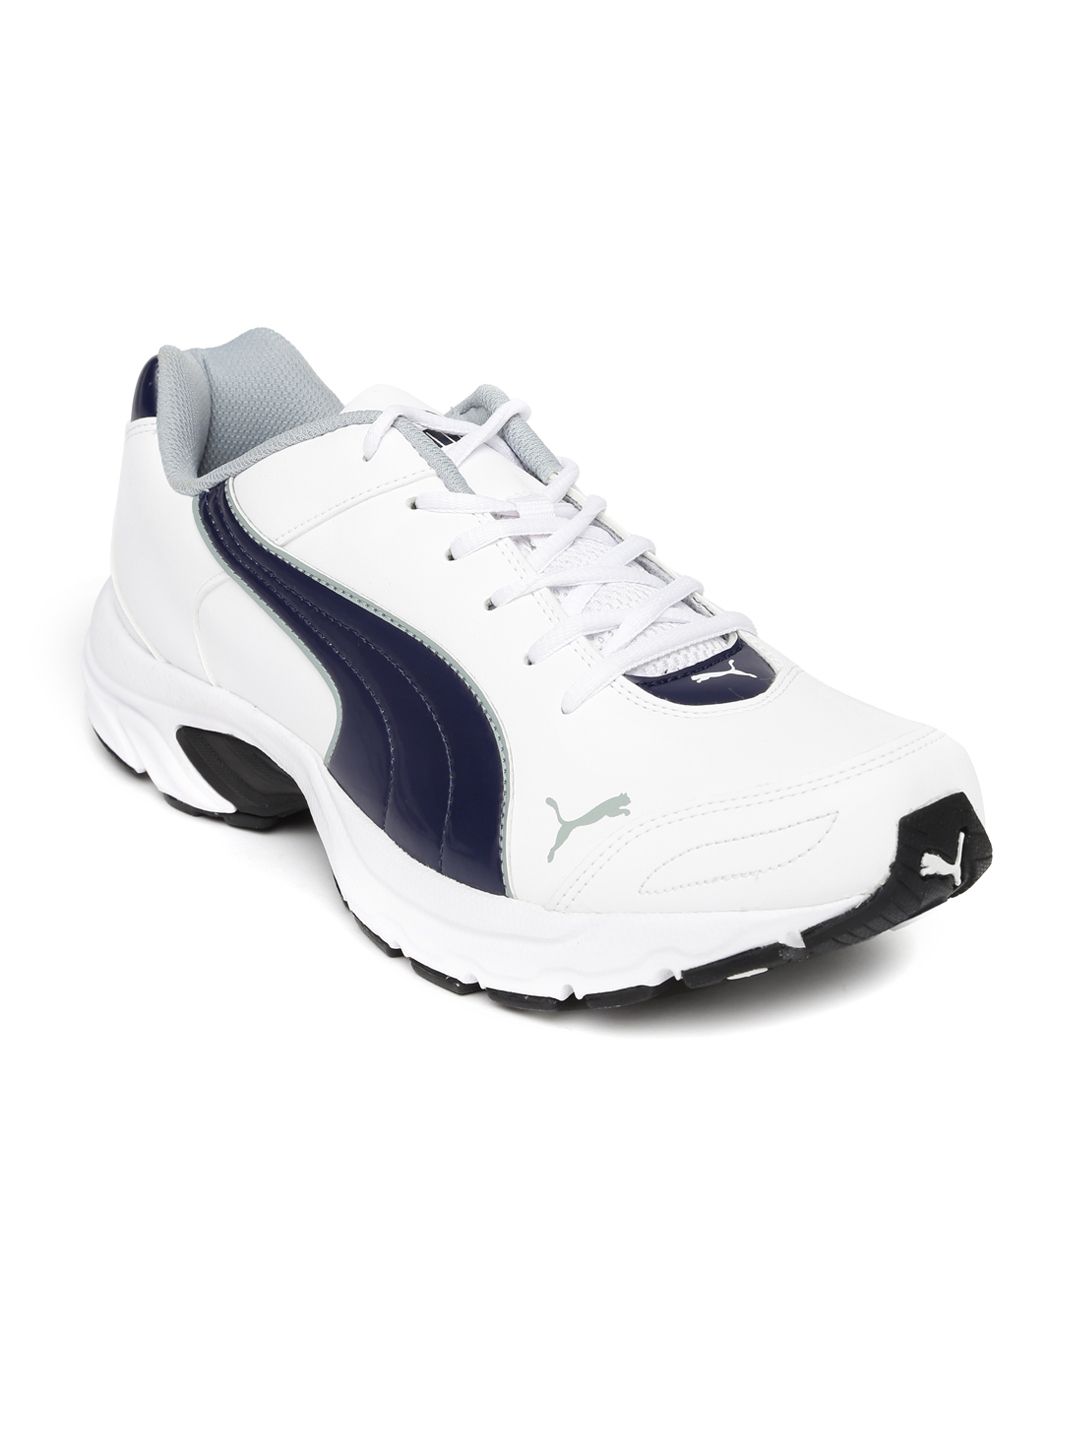 puma shoes for mens in india price